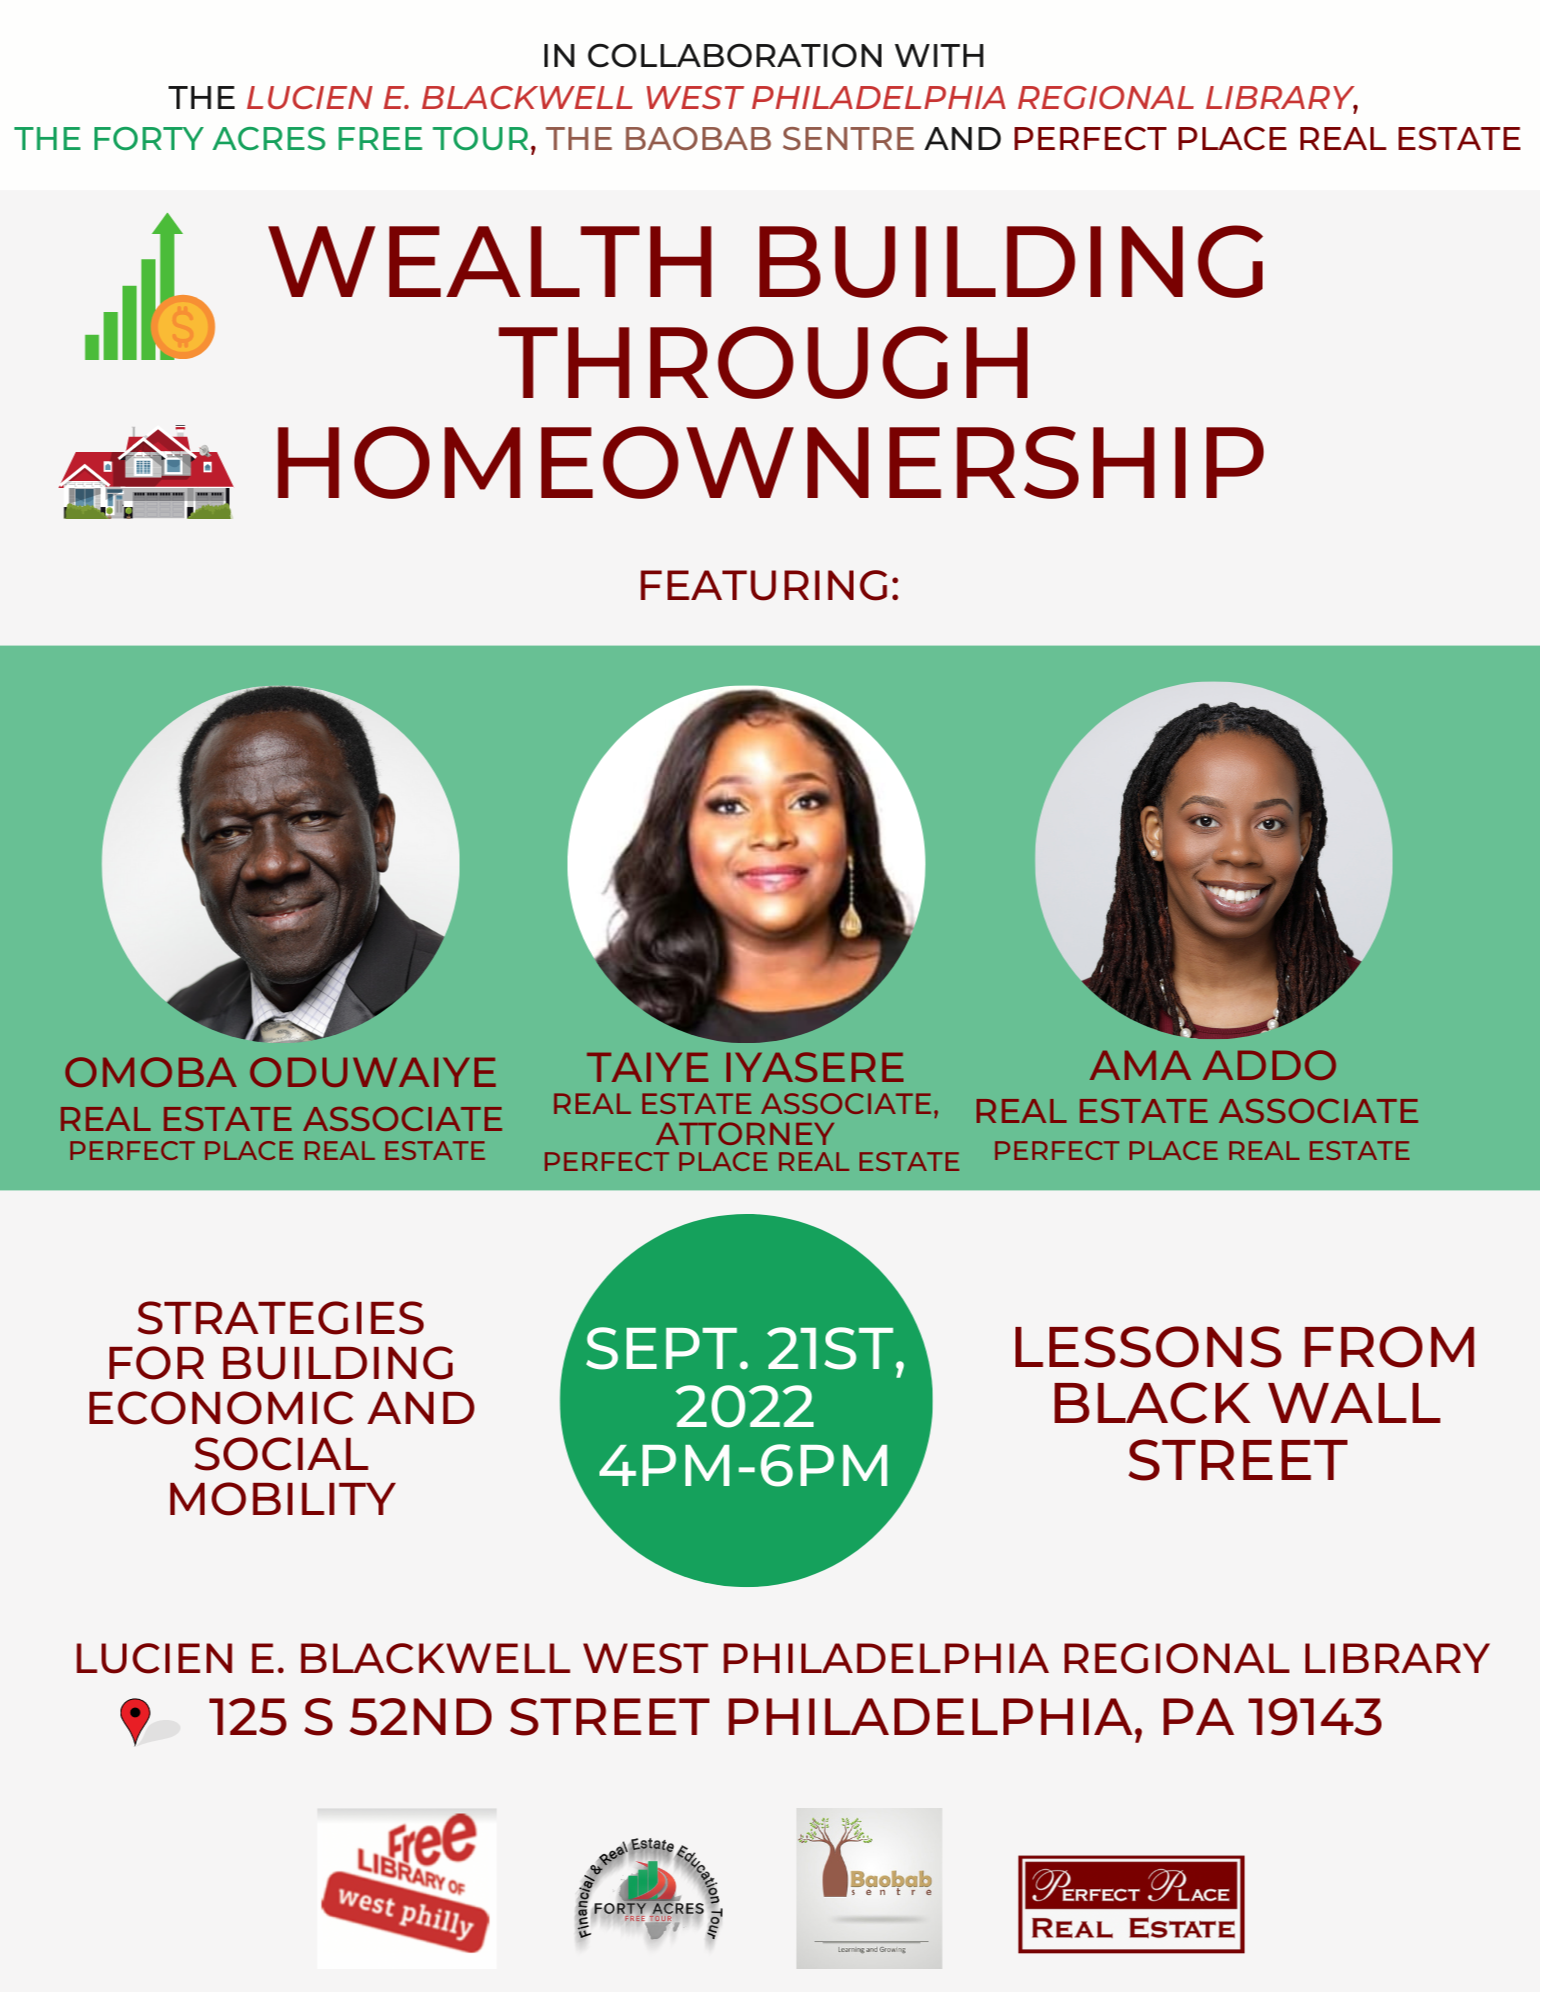 1191_1085493_Wealth Building Through Homeownership-3.png